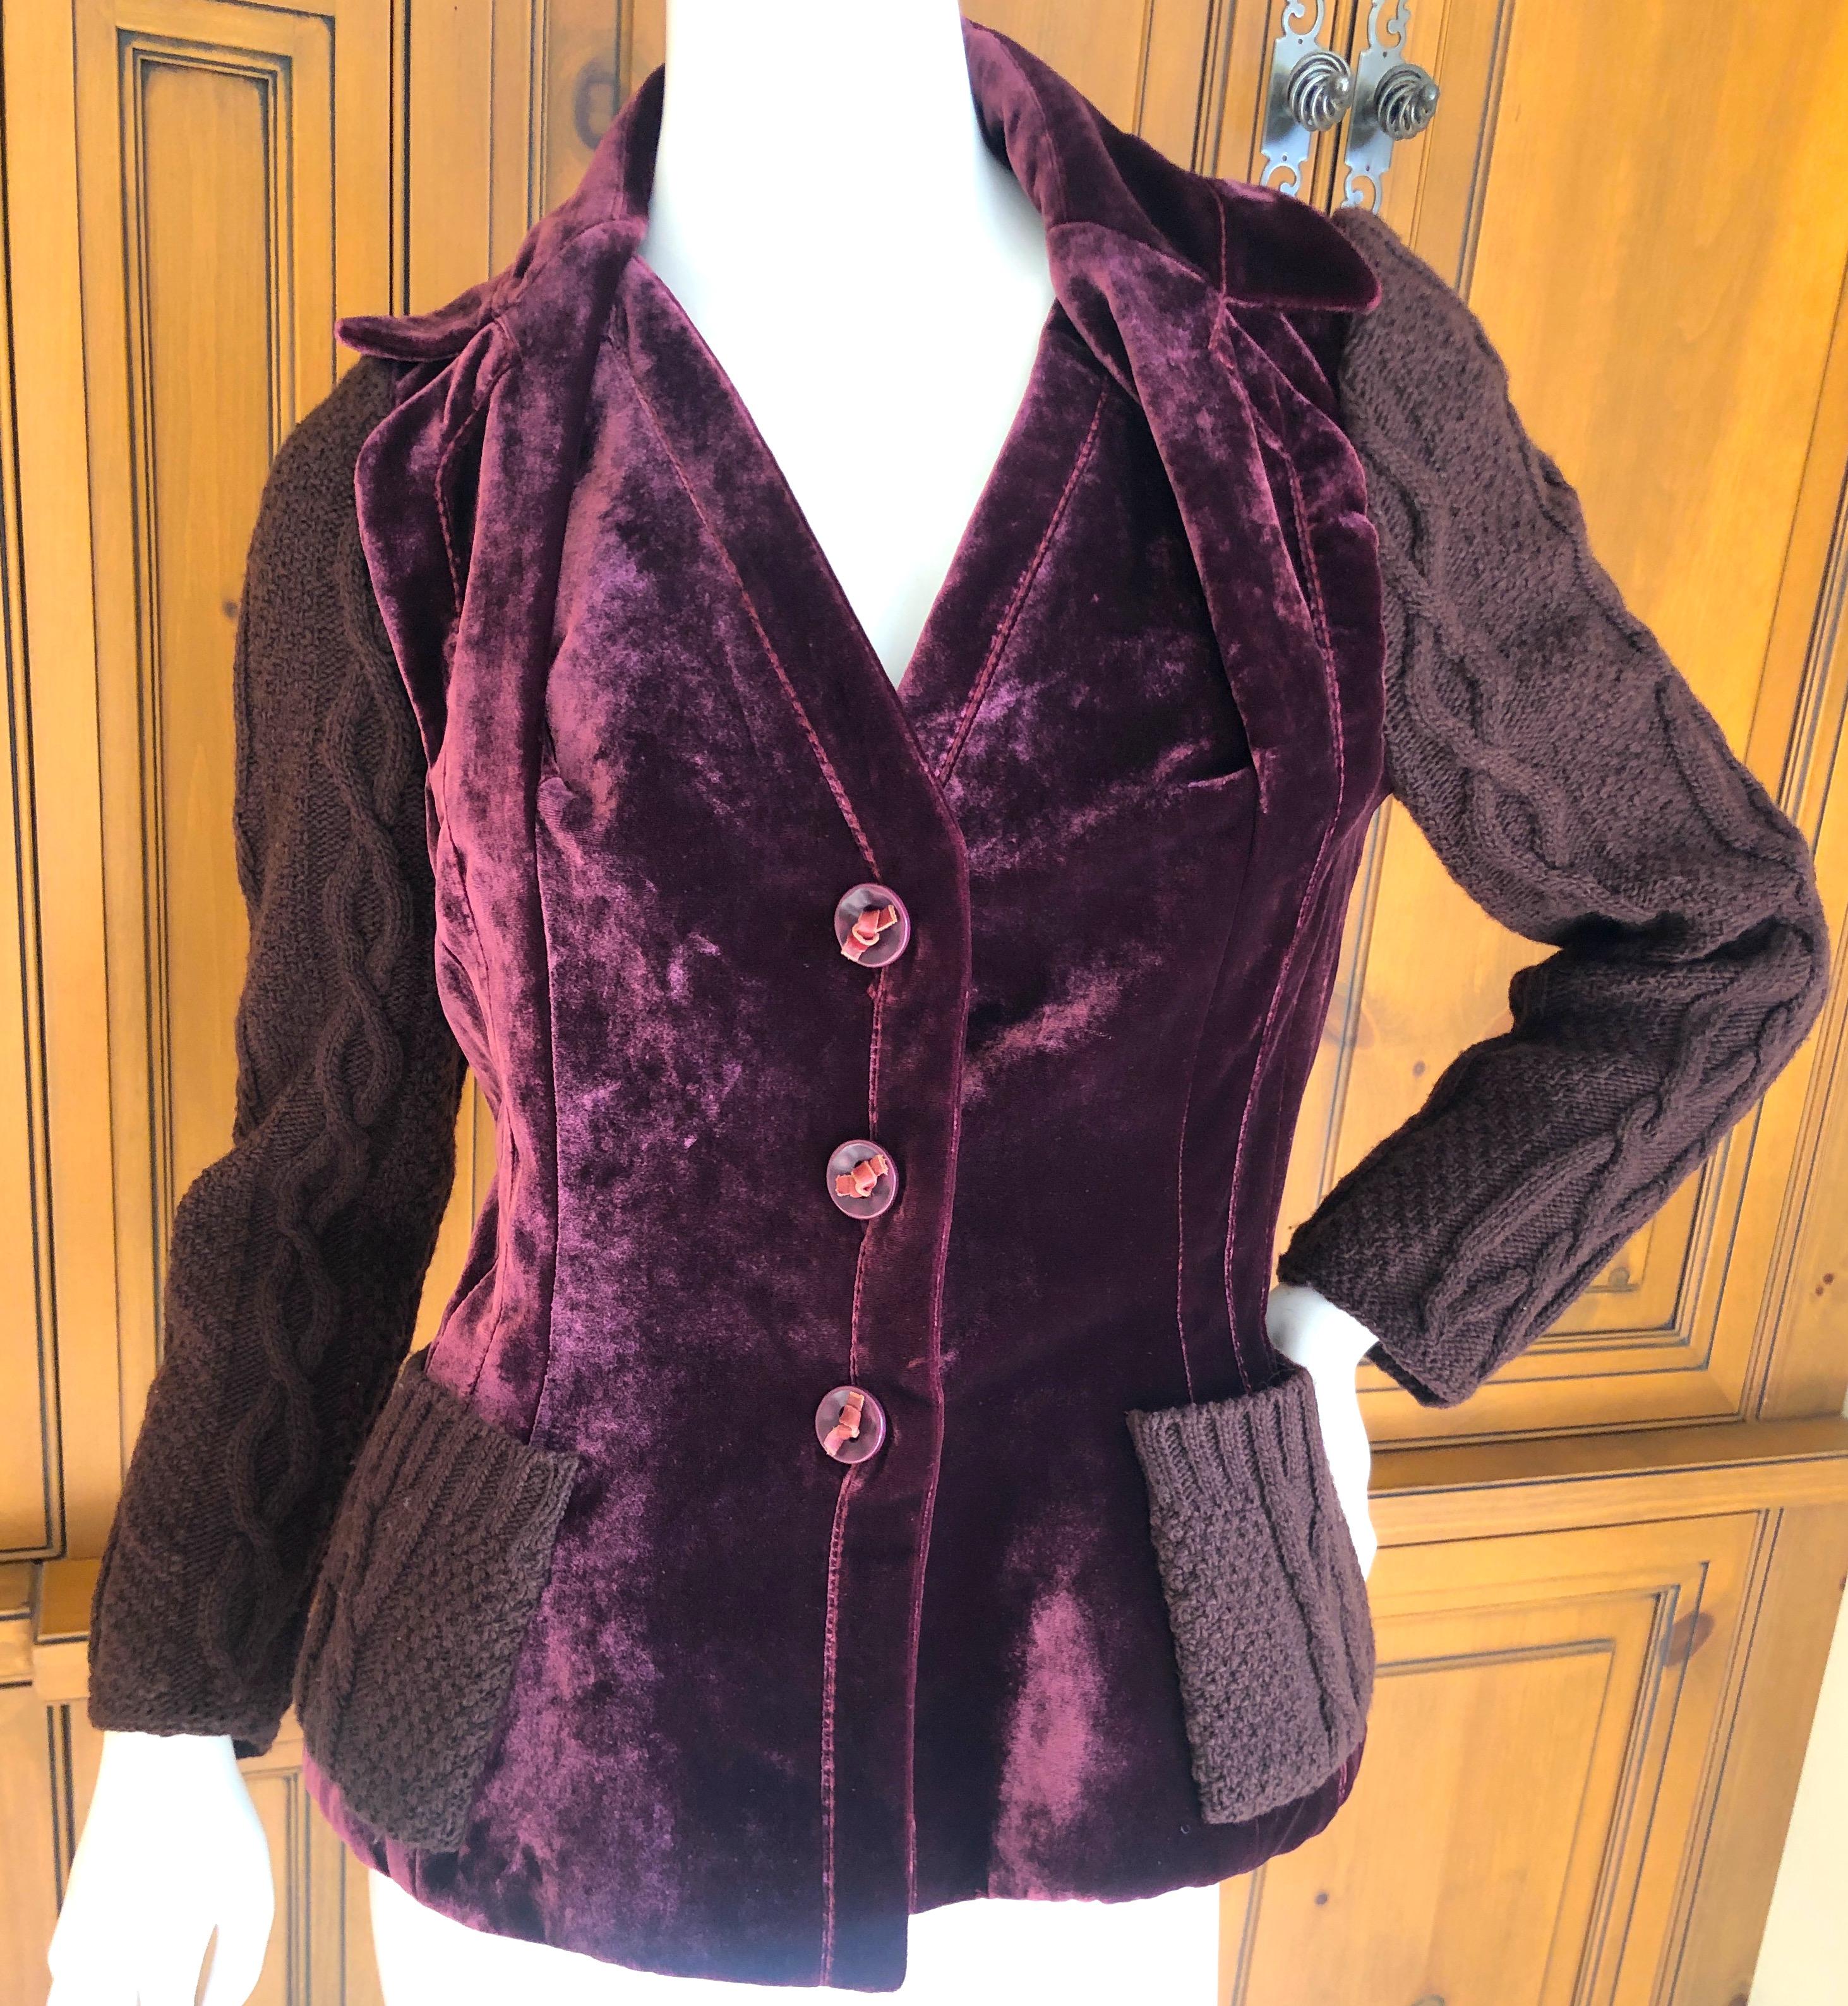 Christian Dior by John Galliano Burgundy Velvet Bar Jacket w Cable Knit Details
Size 40
Bust 36